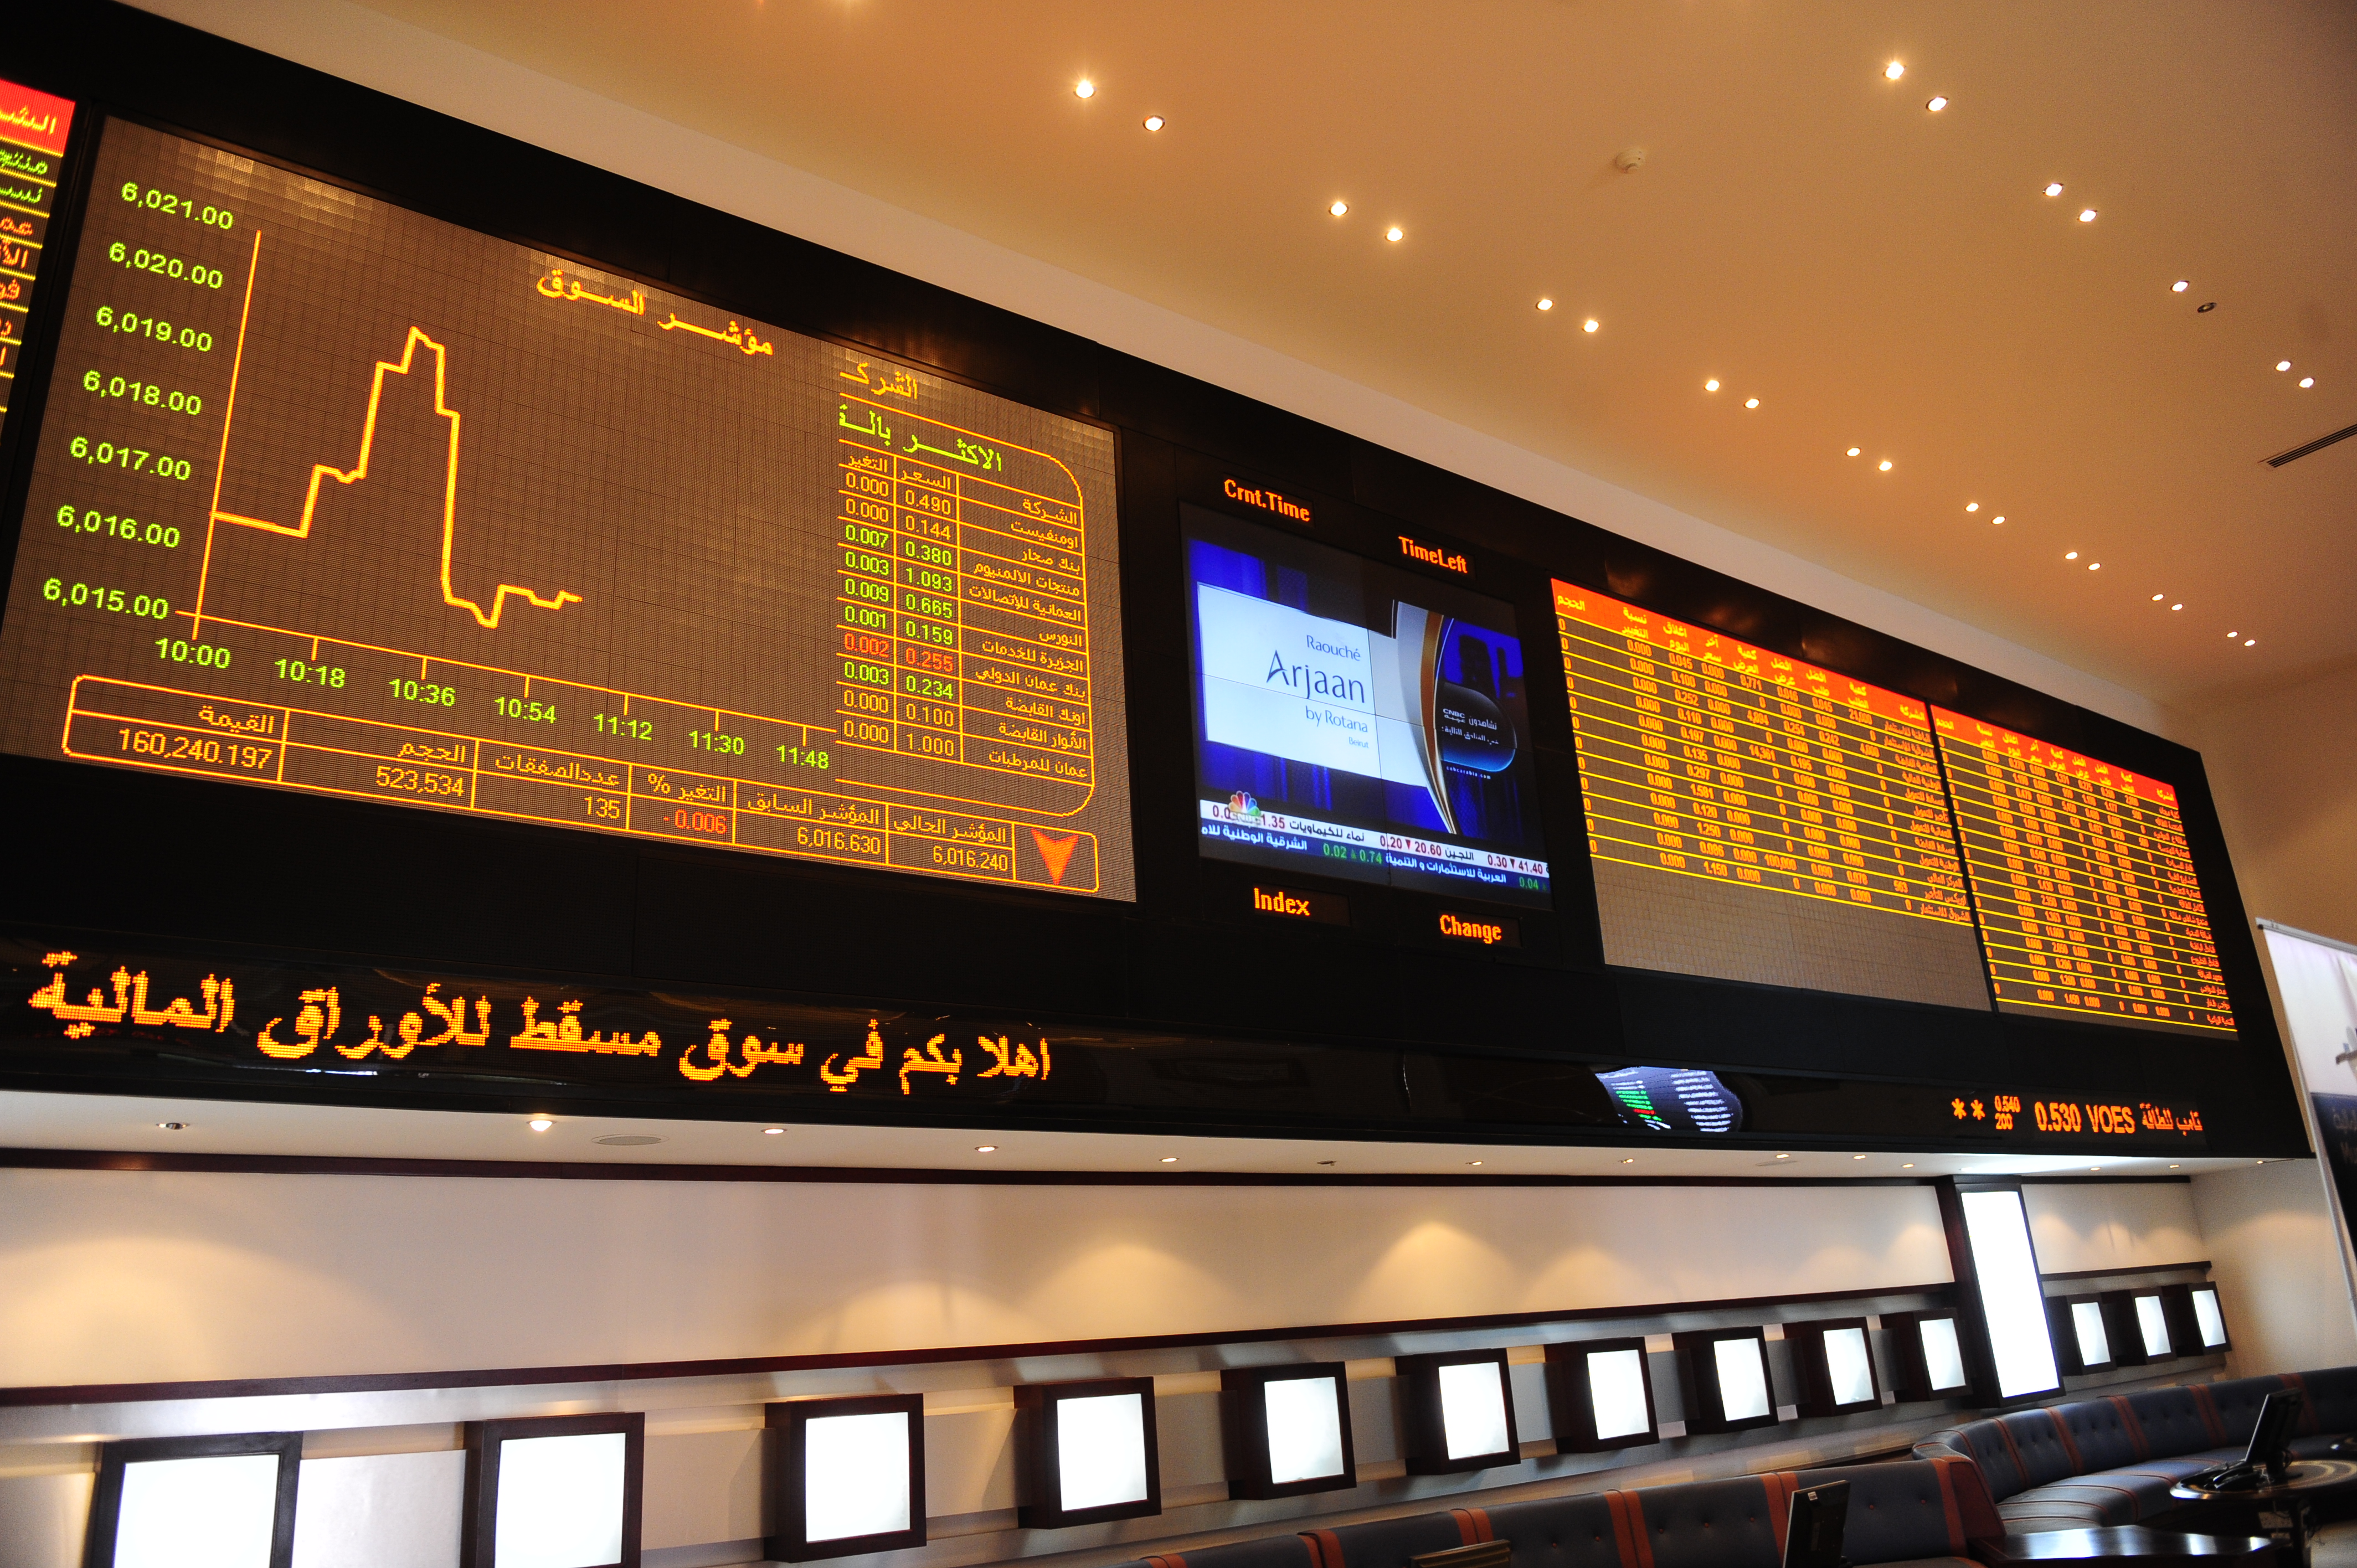 Sell-off in industrial stocks drags Oman shares lower